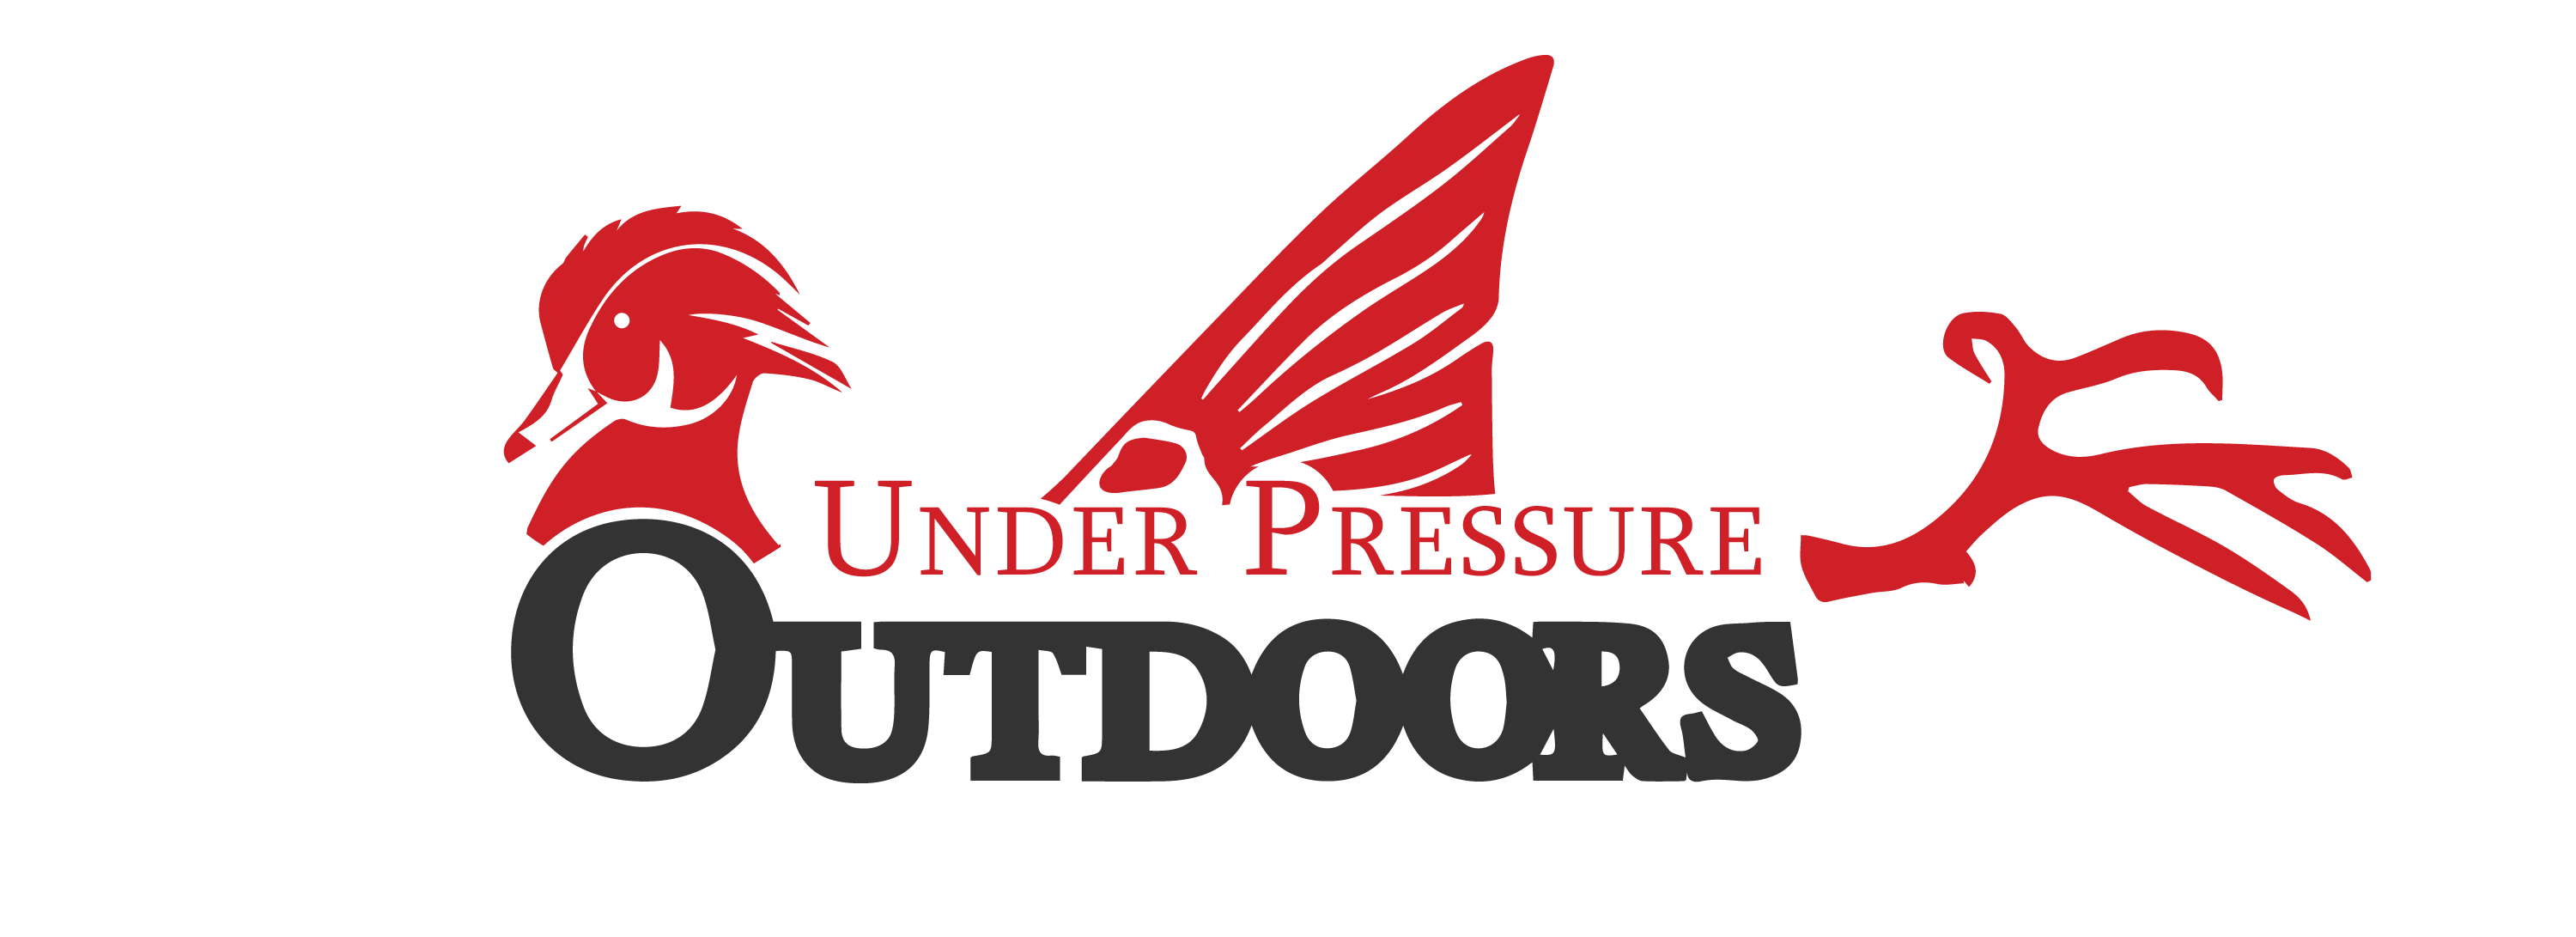 Under Pressure Outdoors Podcast